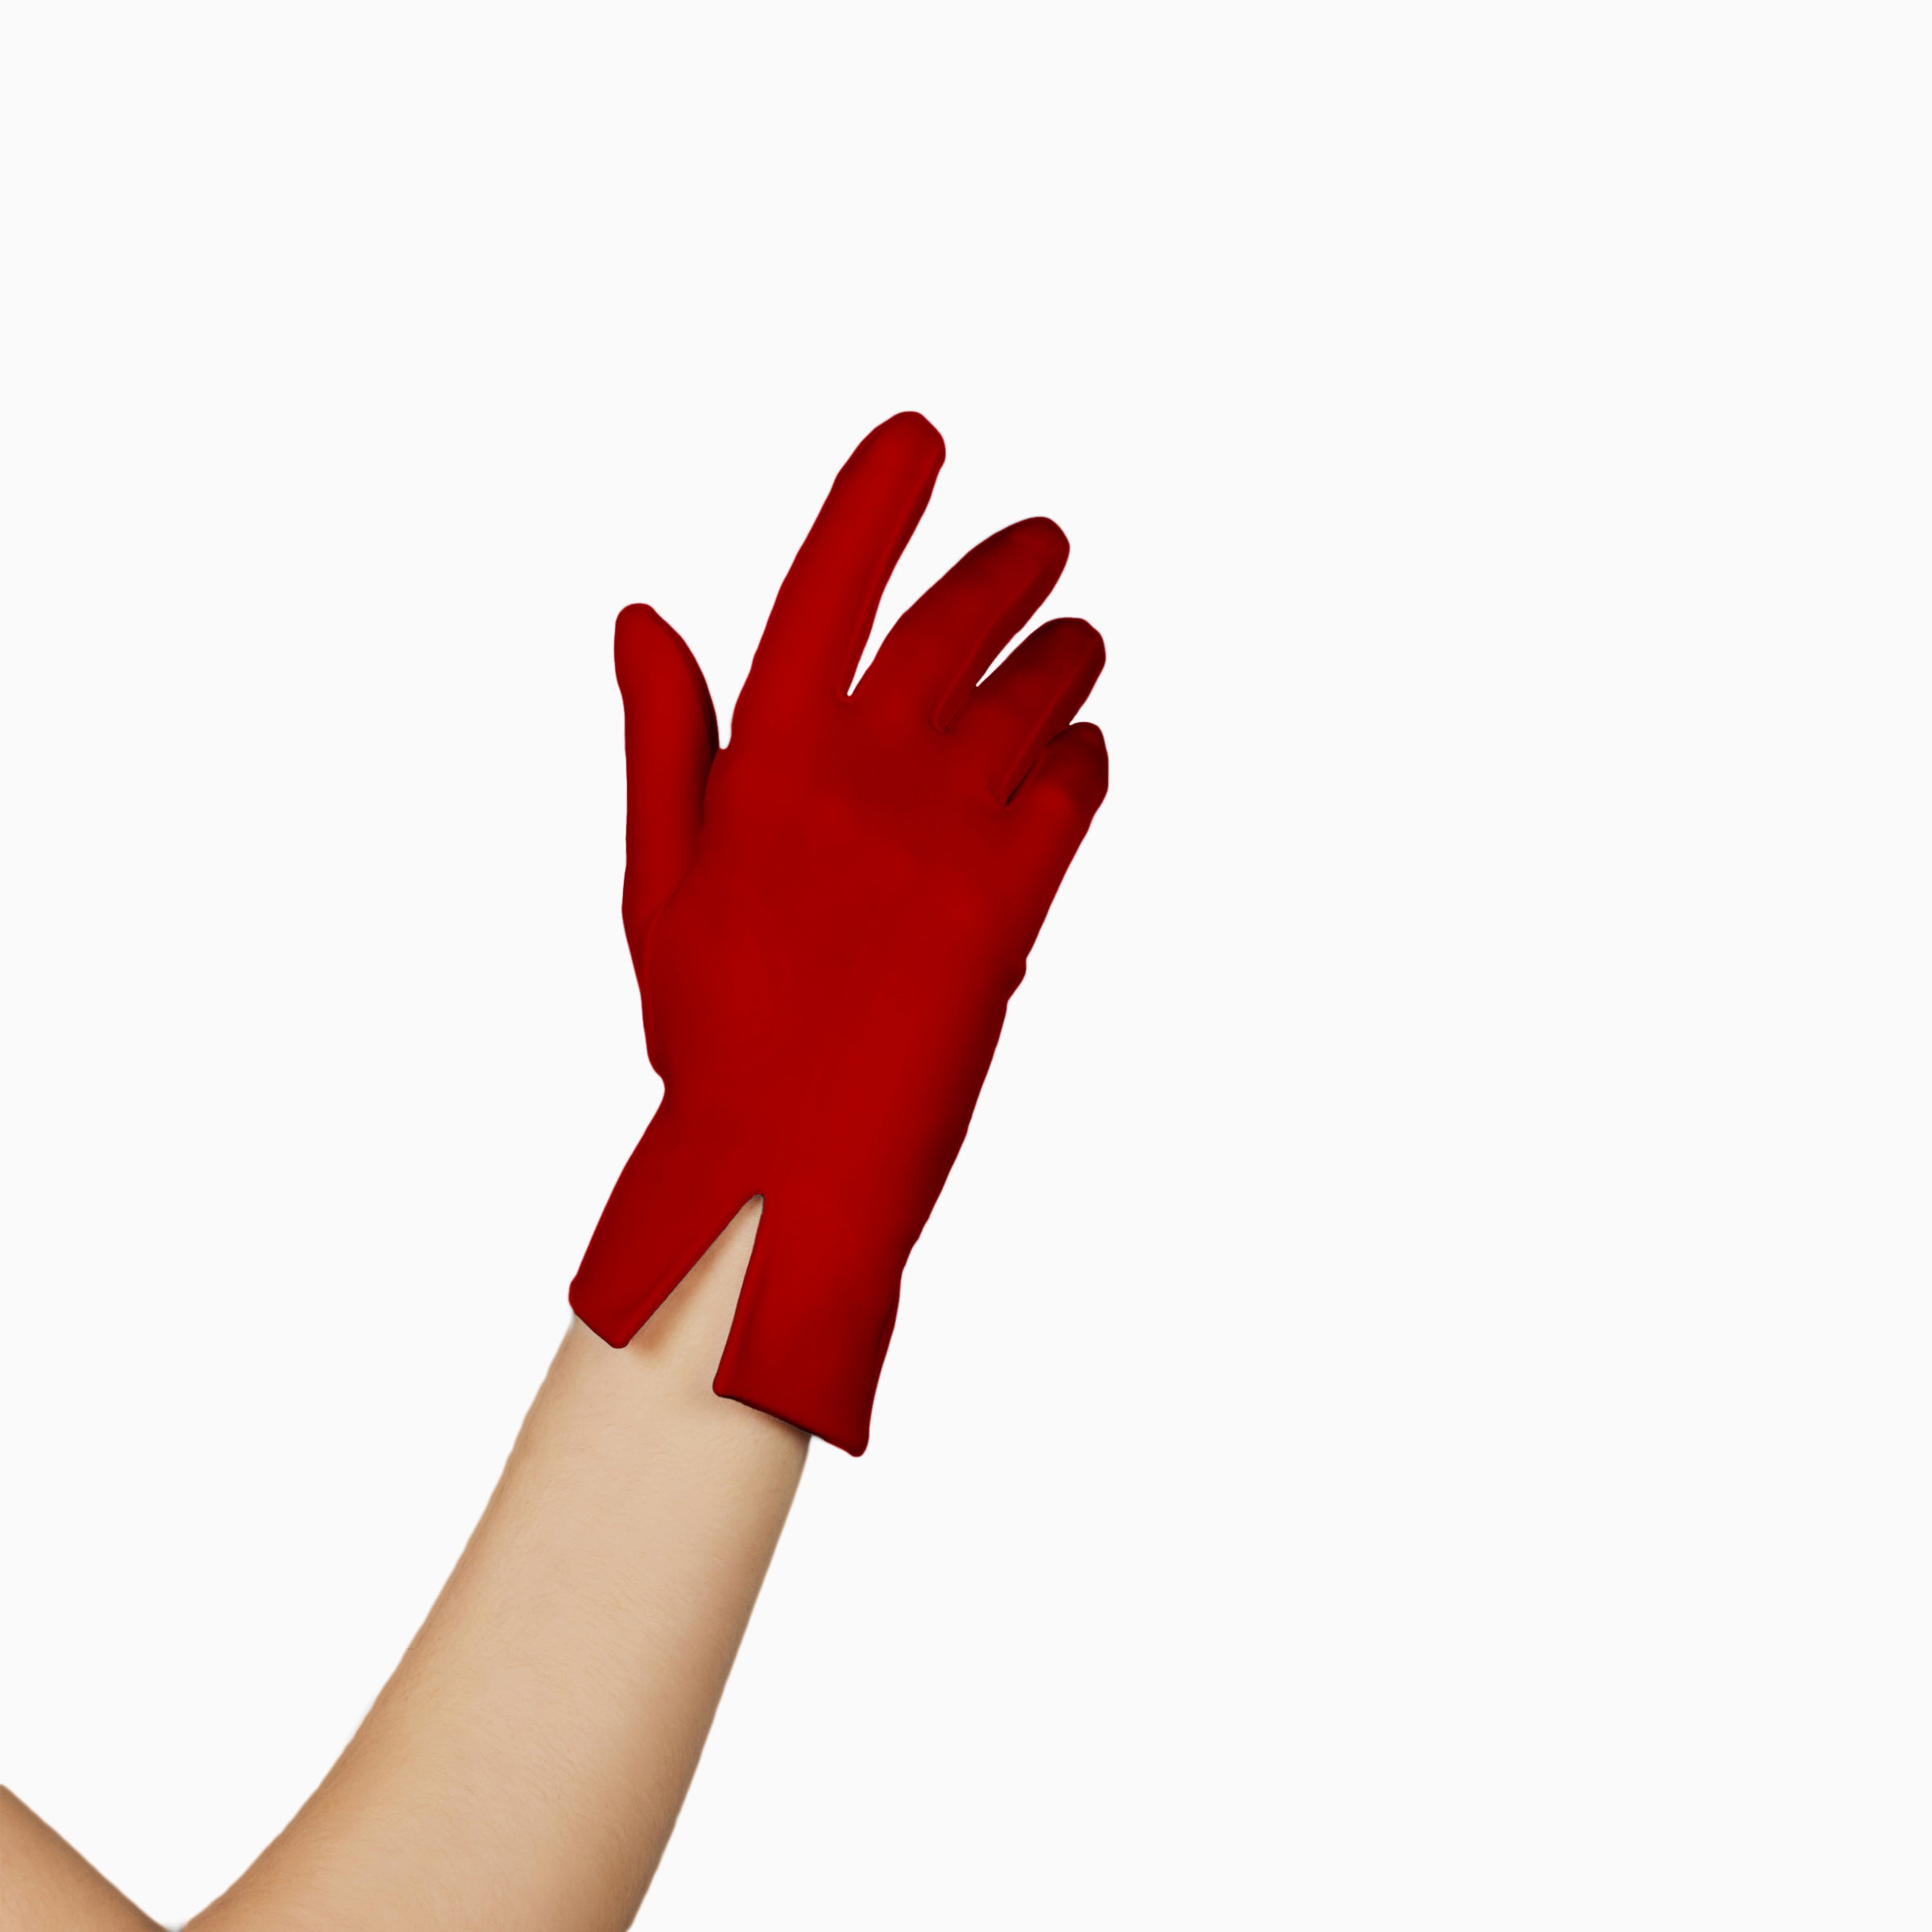 A woman's hand in THE ISABELLE - Red Day Glove - Holiday Edition by LadyFinch.